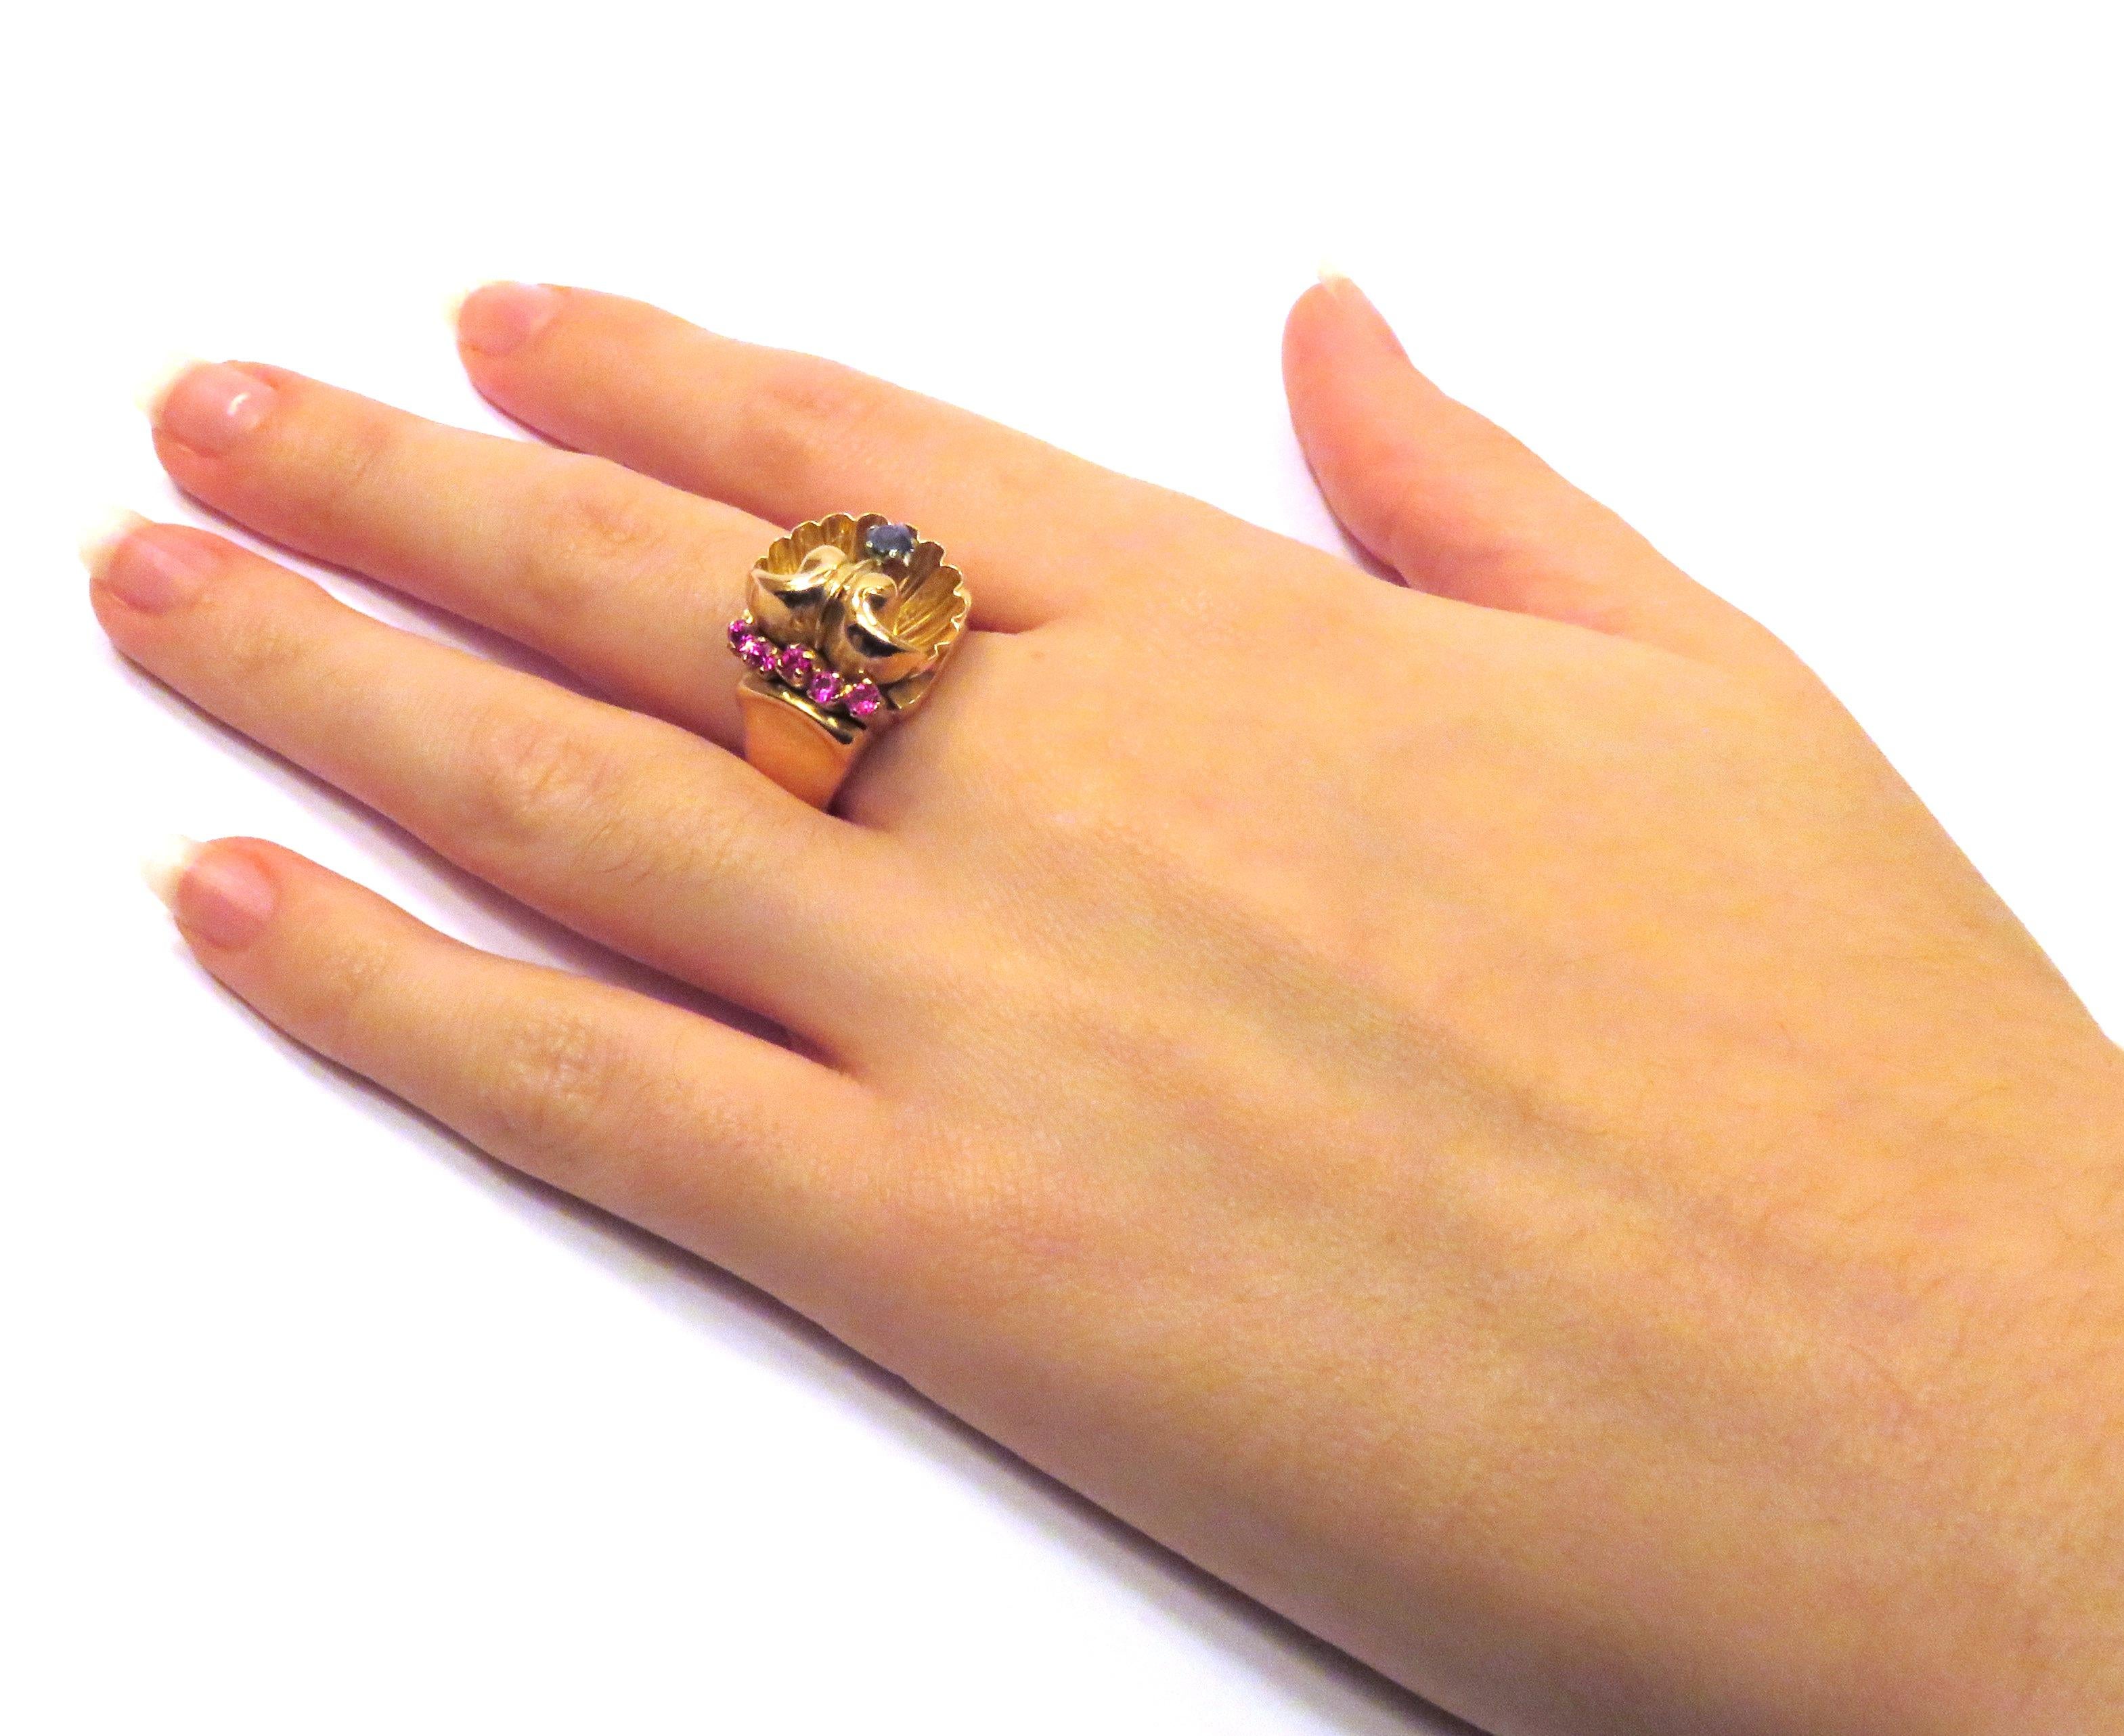 1940s Retro Ring with Five Rubies and Sapphire in 18 kt rose gold, made in Italy
Us finger size 7, it can be resized.
It  is stamped with the Italian Mark 750
________________________________________________________________________

Something about